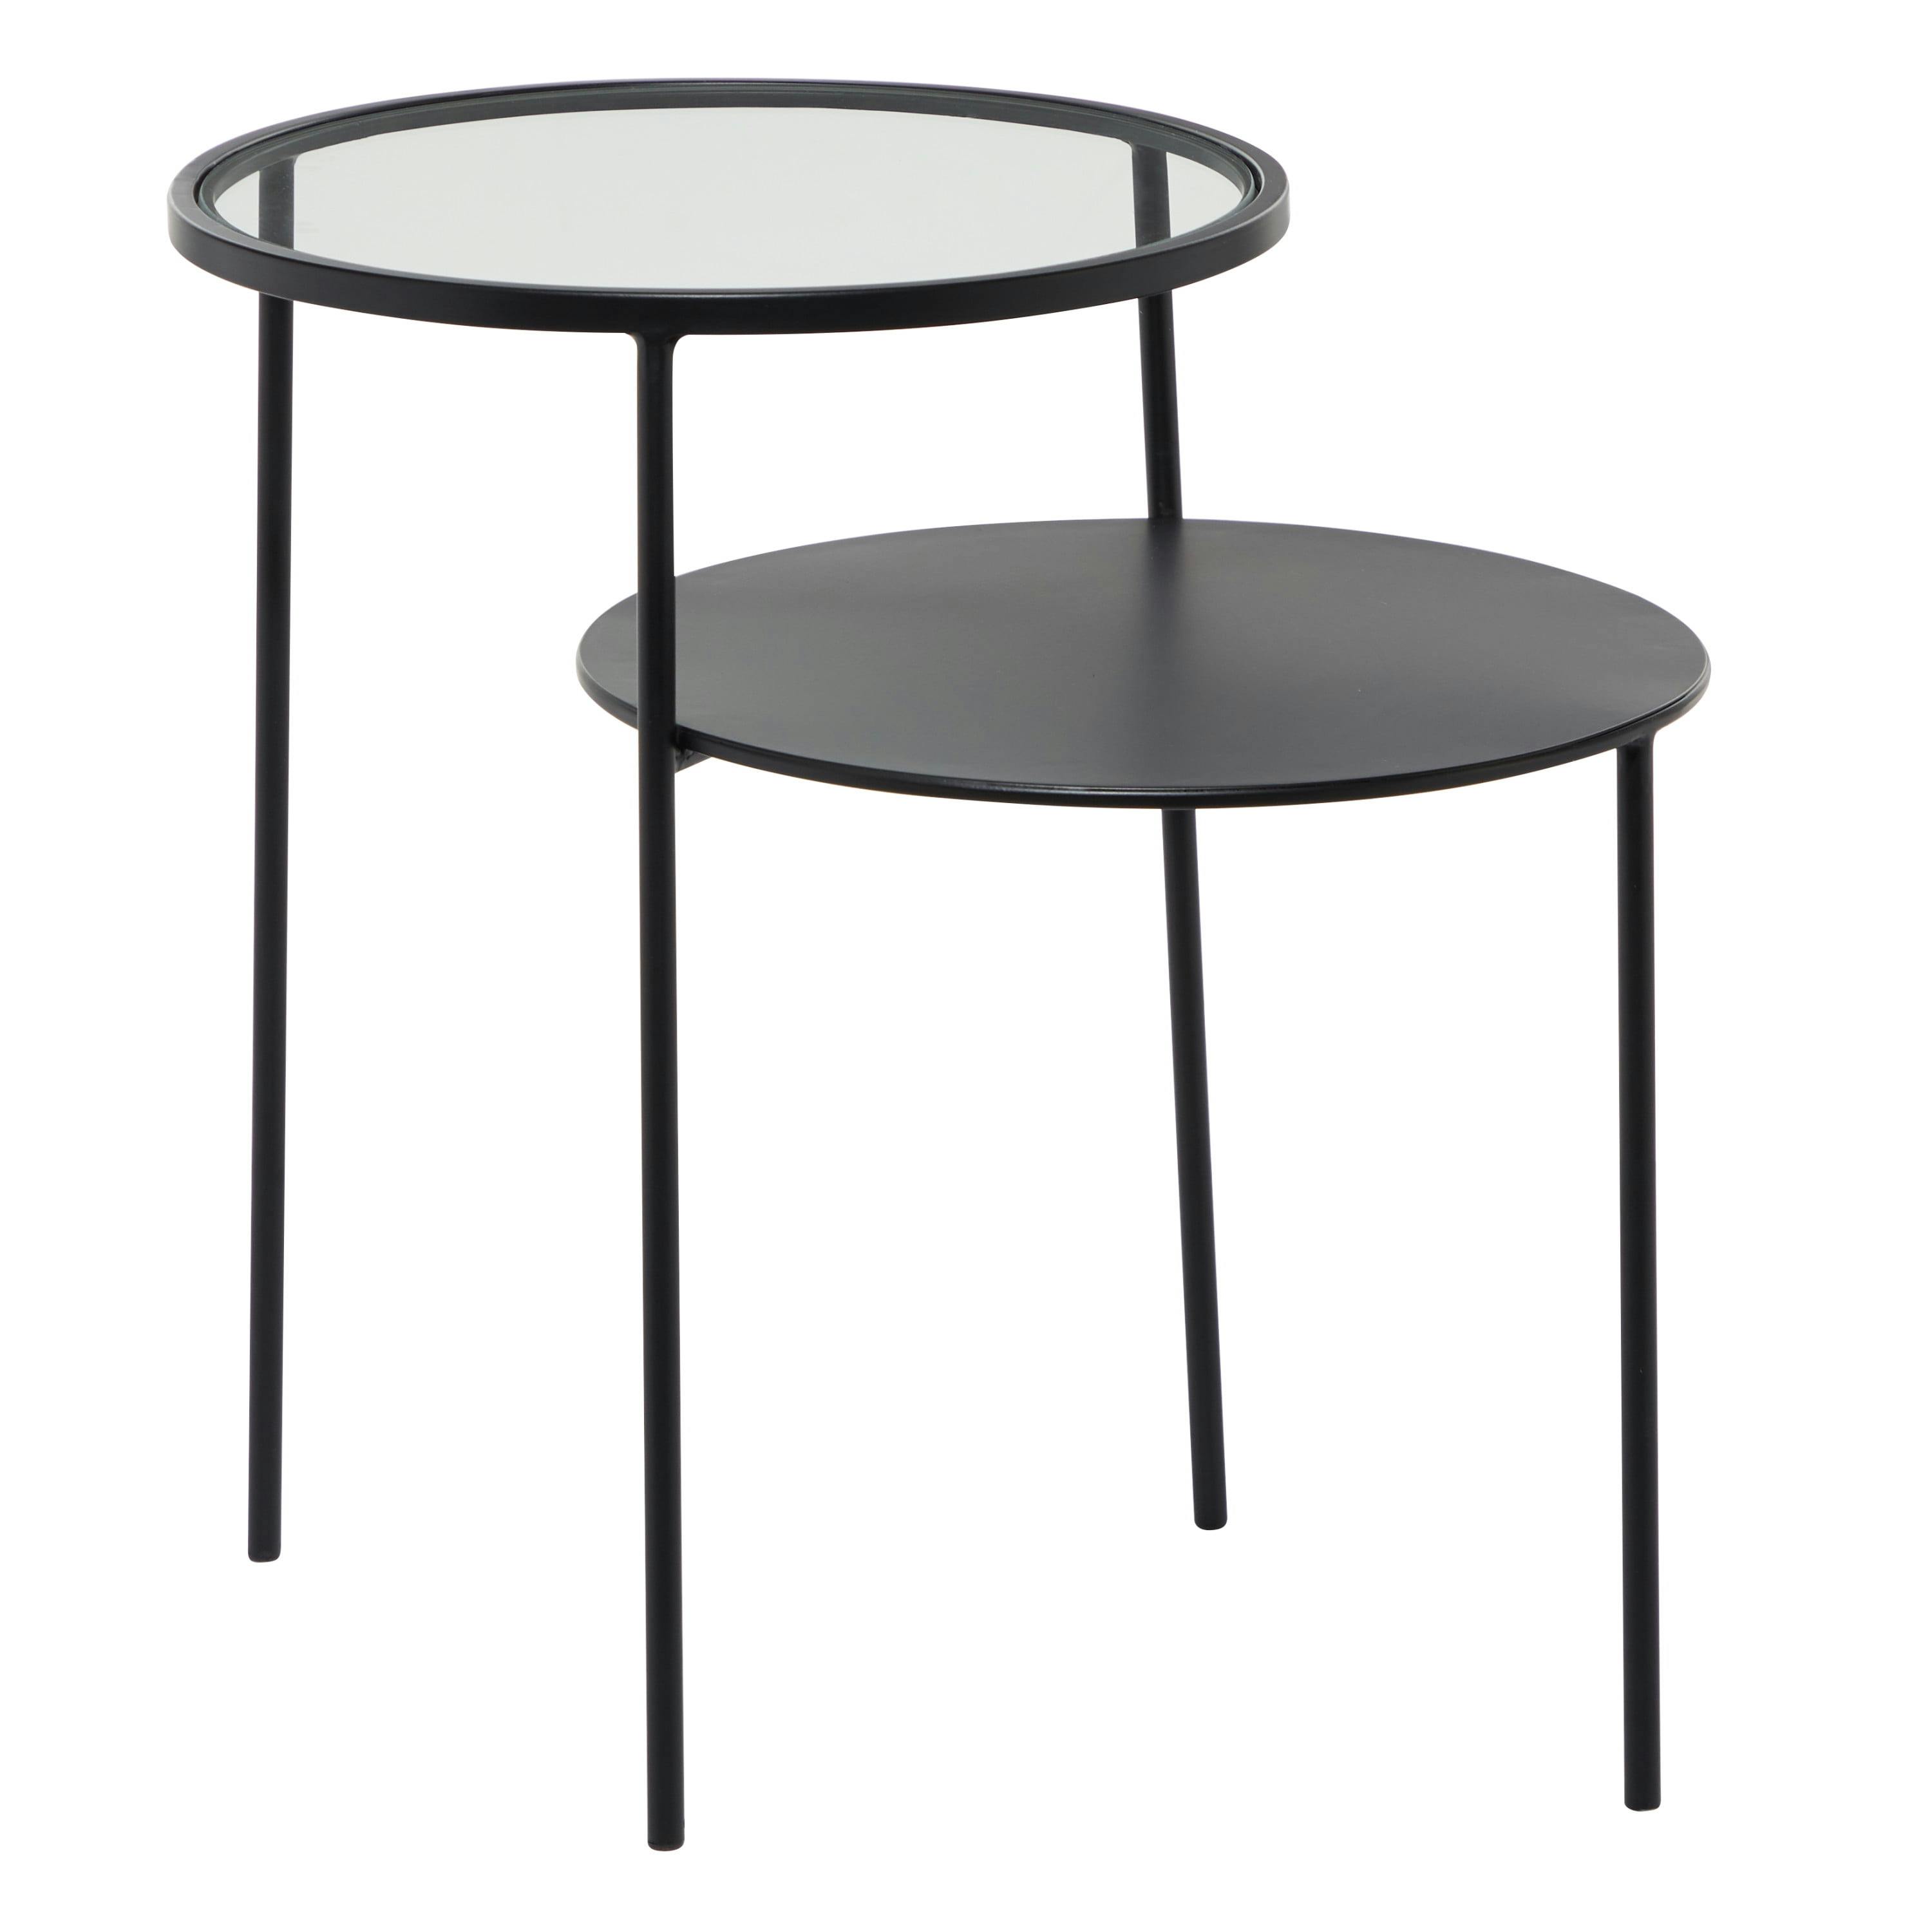 Sleek 23" Black Metal and Glass Round Accent Table with Storage